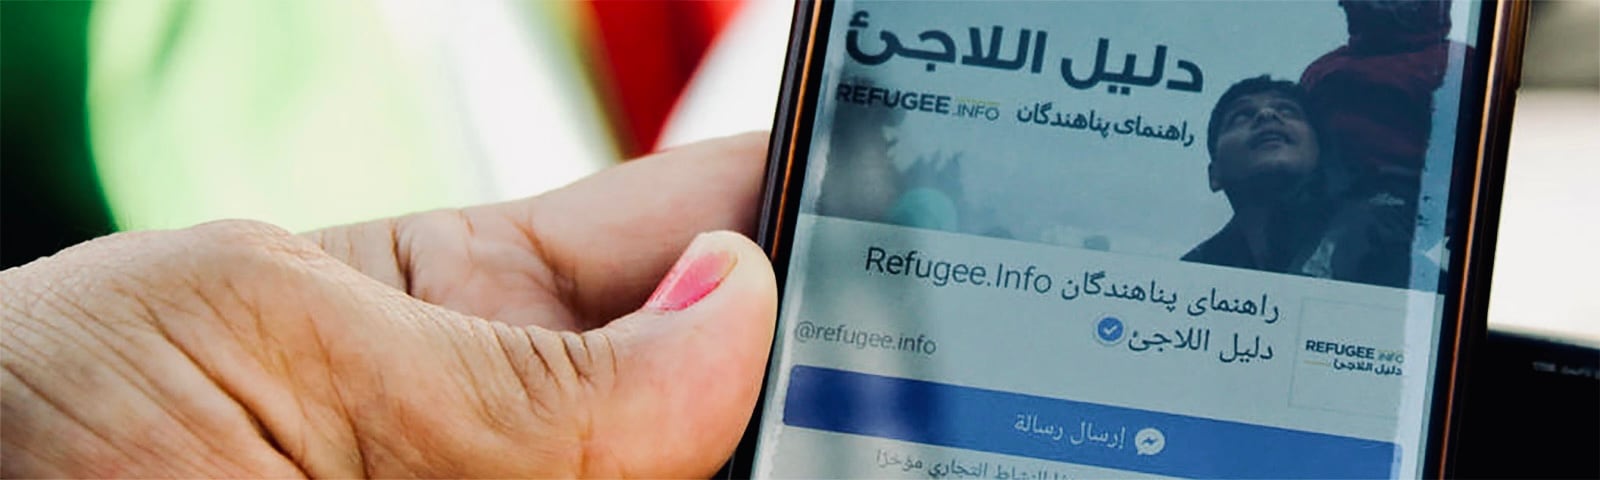 Refugee response app in use on mobile phone